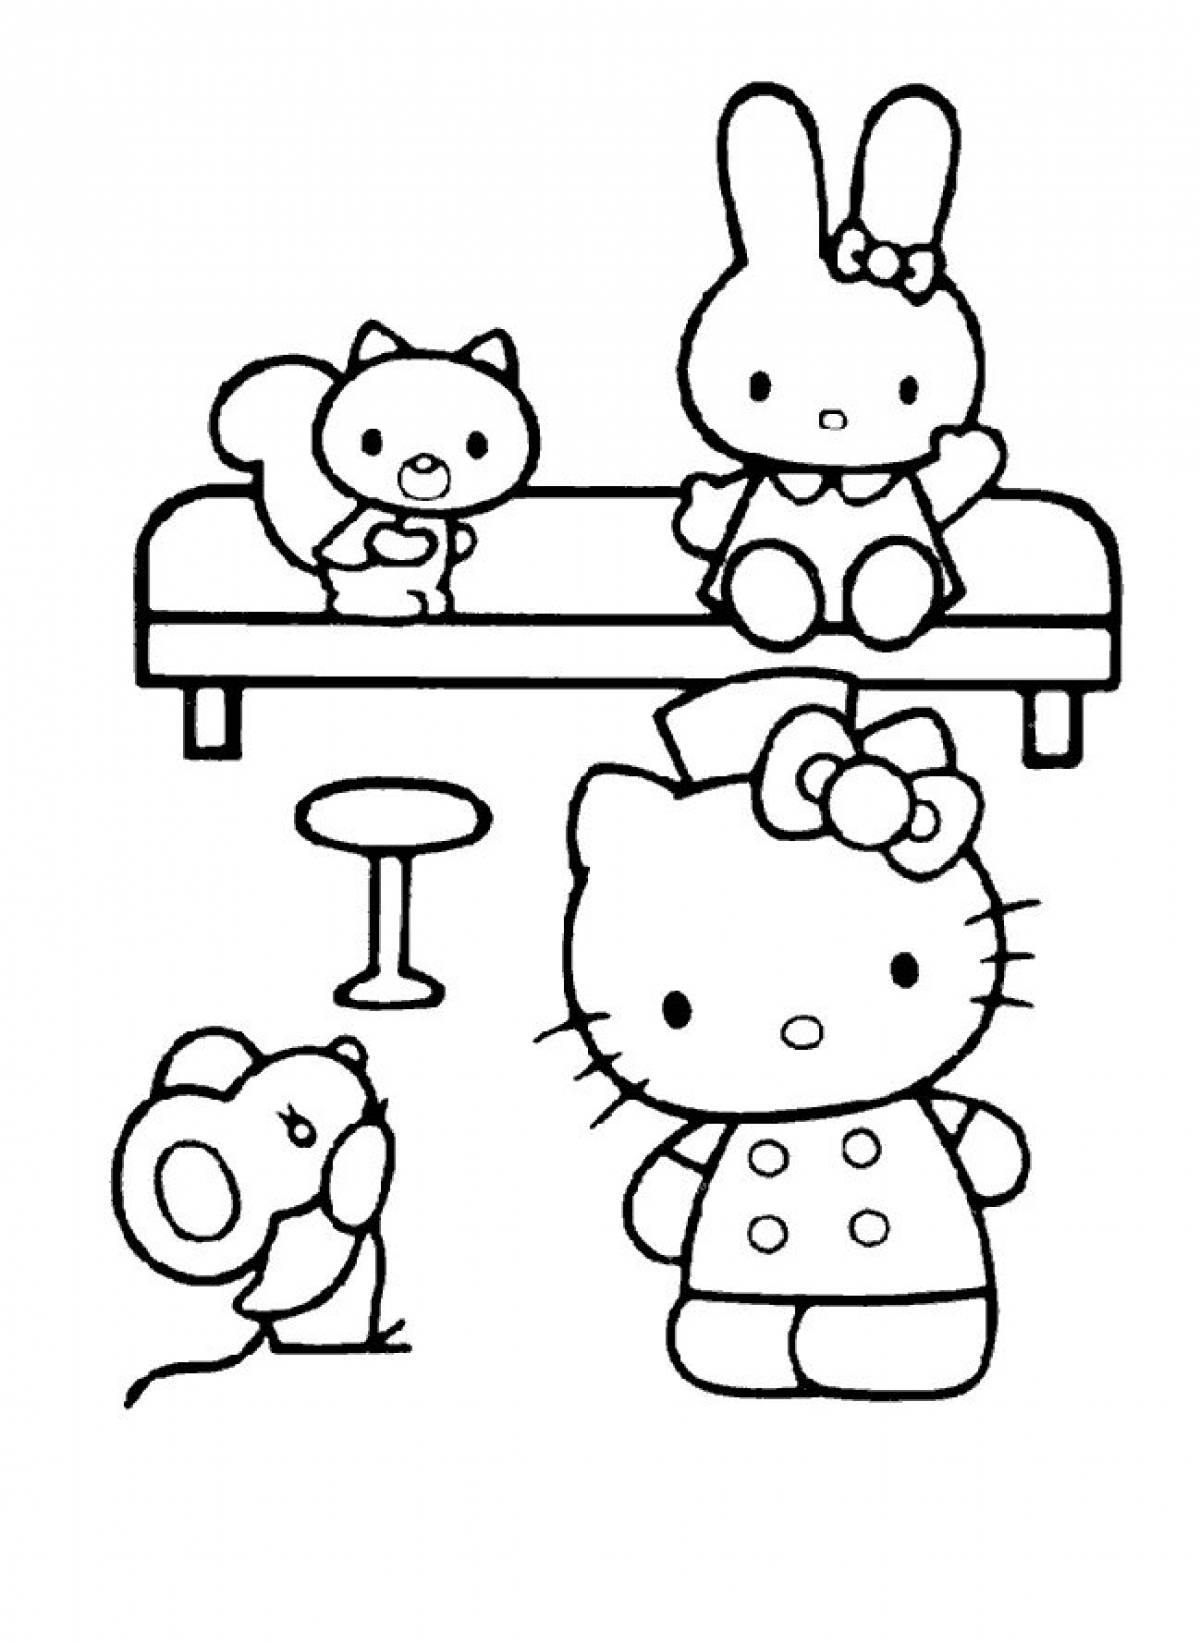 Coloring sun hello kitty and her friends